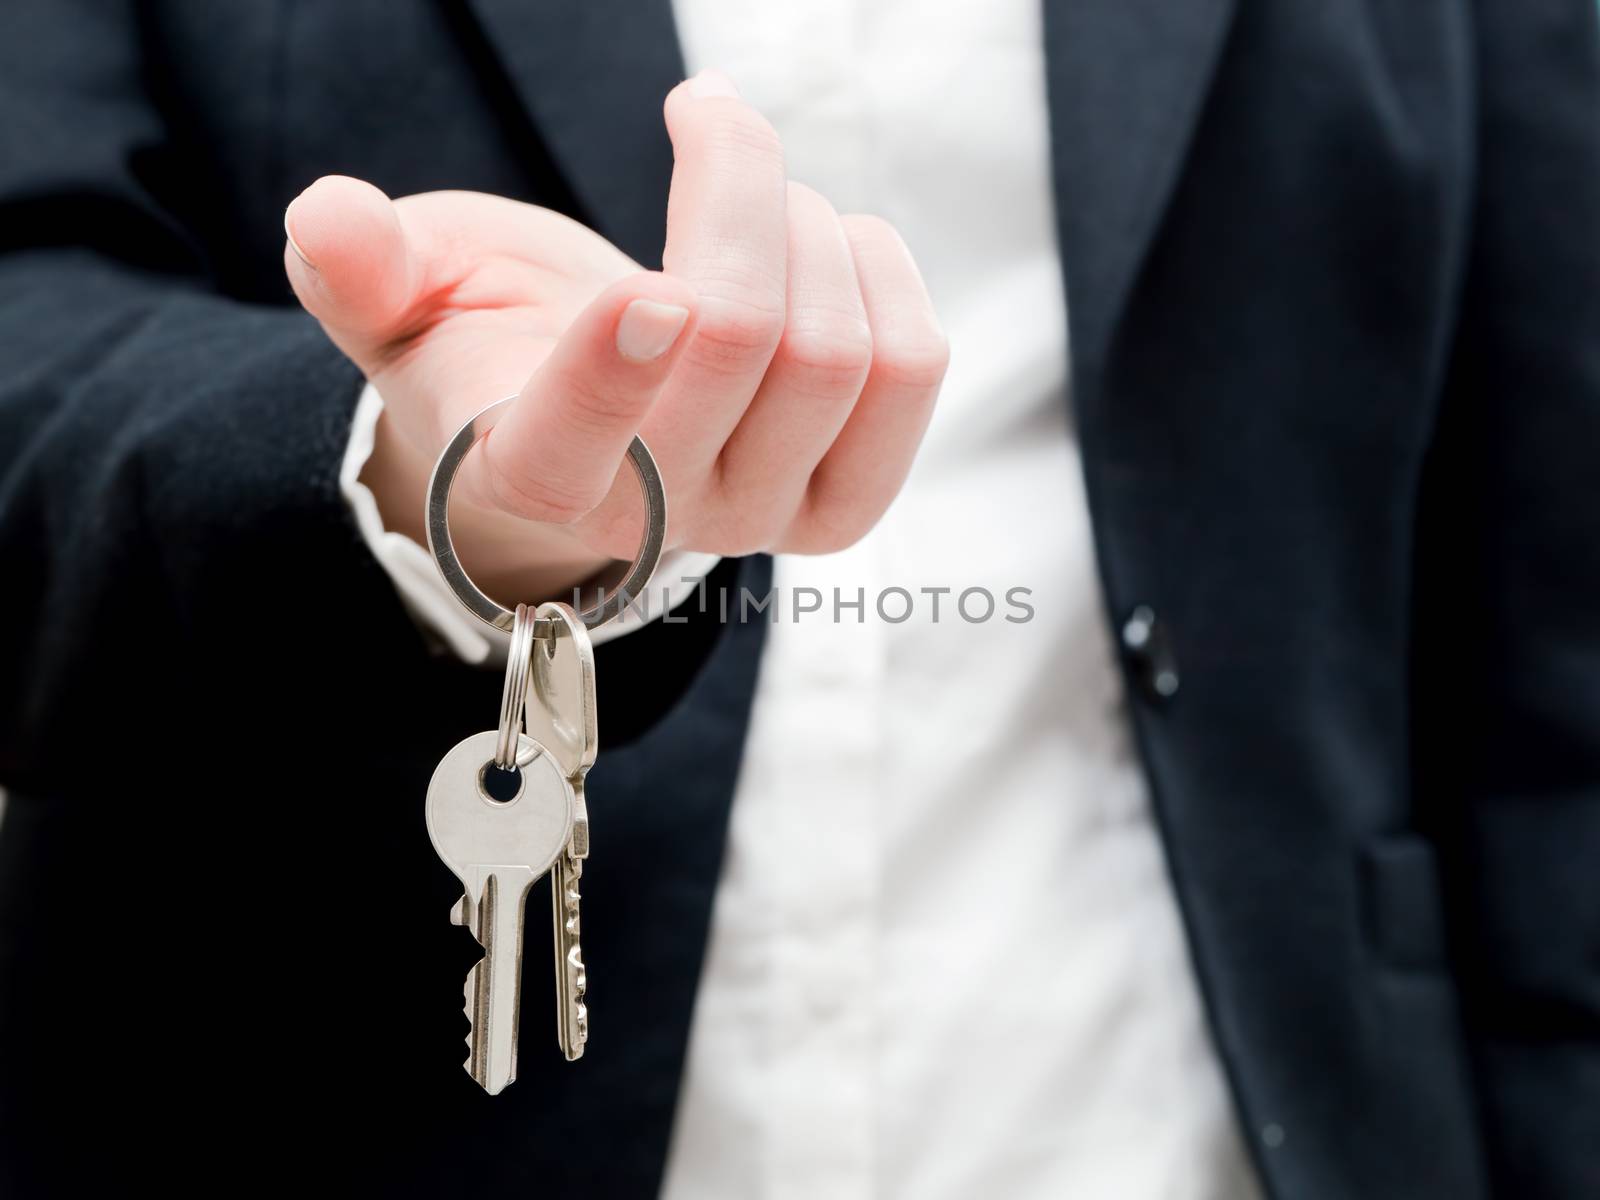 A real estate agent holding keys to a new house in her hands. Real estate industry